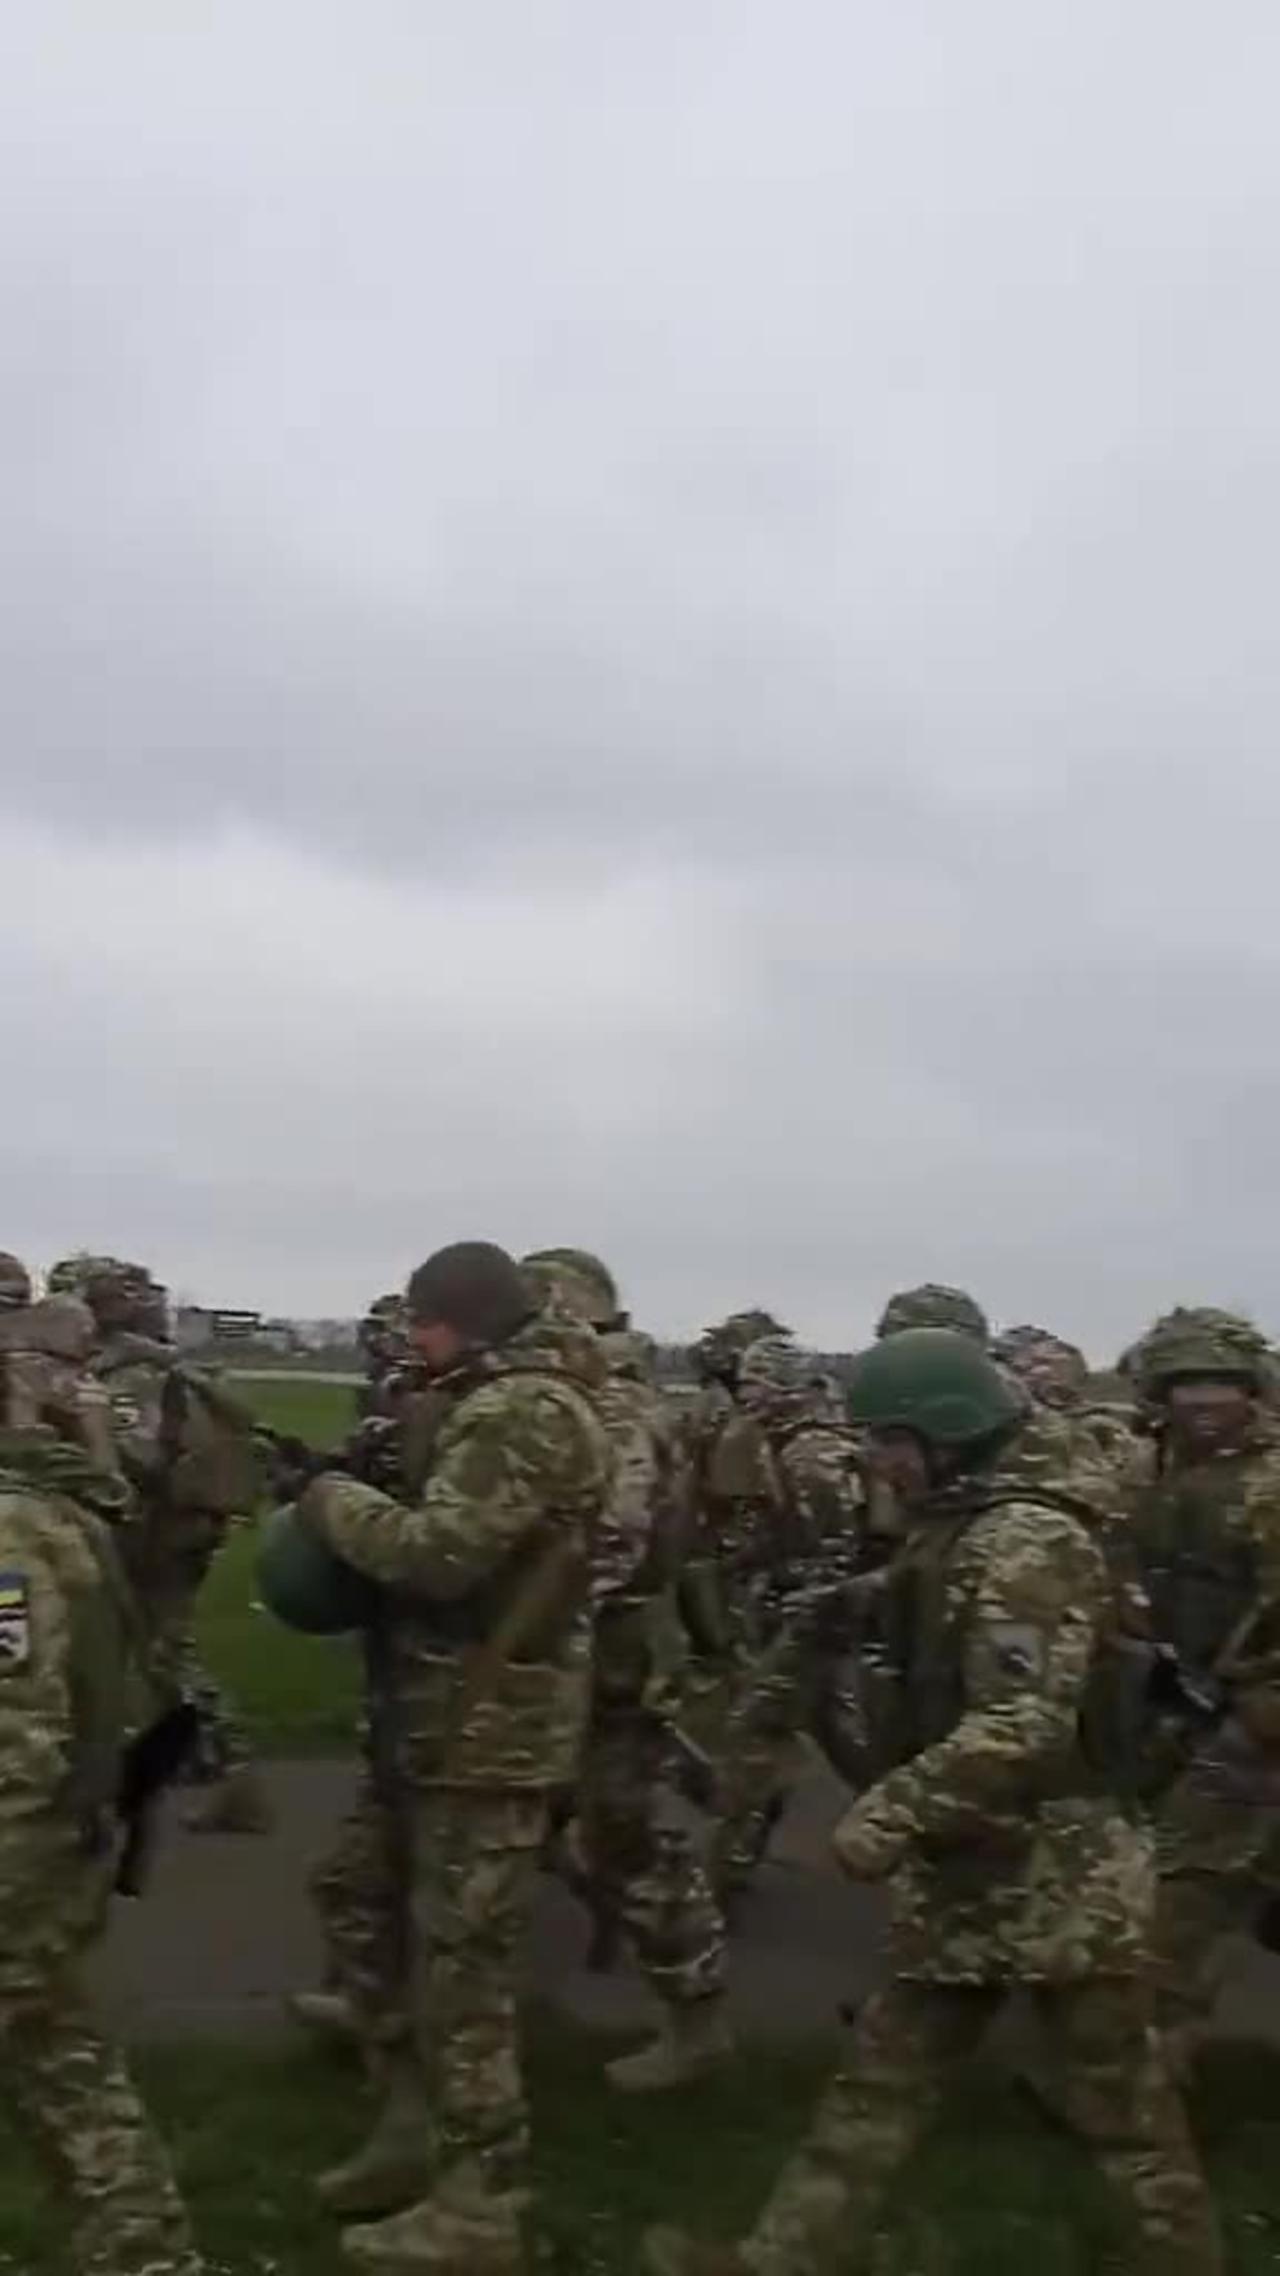 Ukrainian Troops March Towards Counter-Offensive